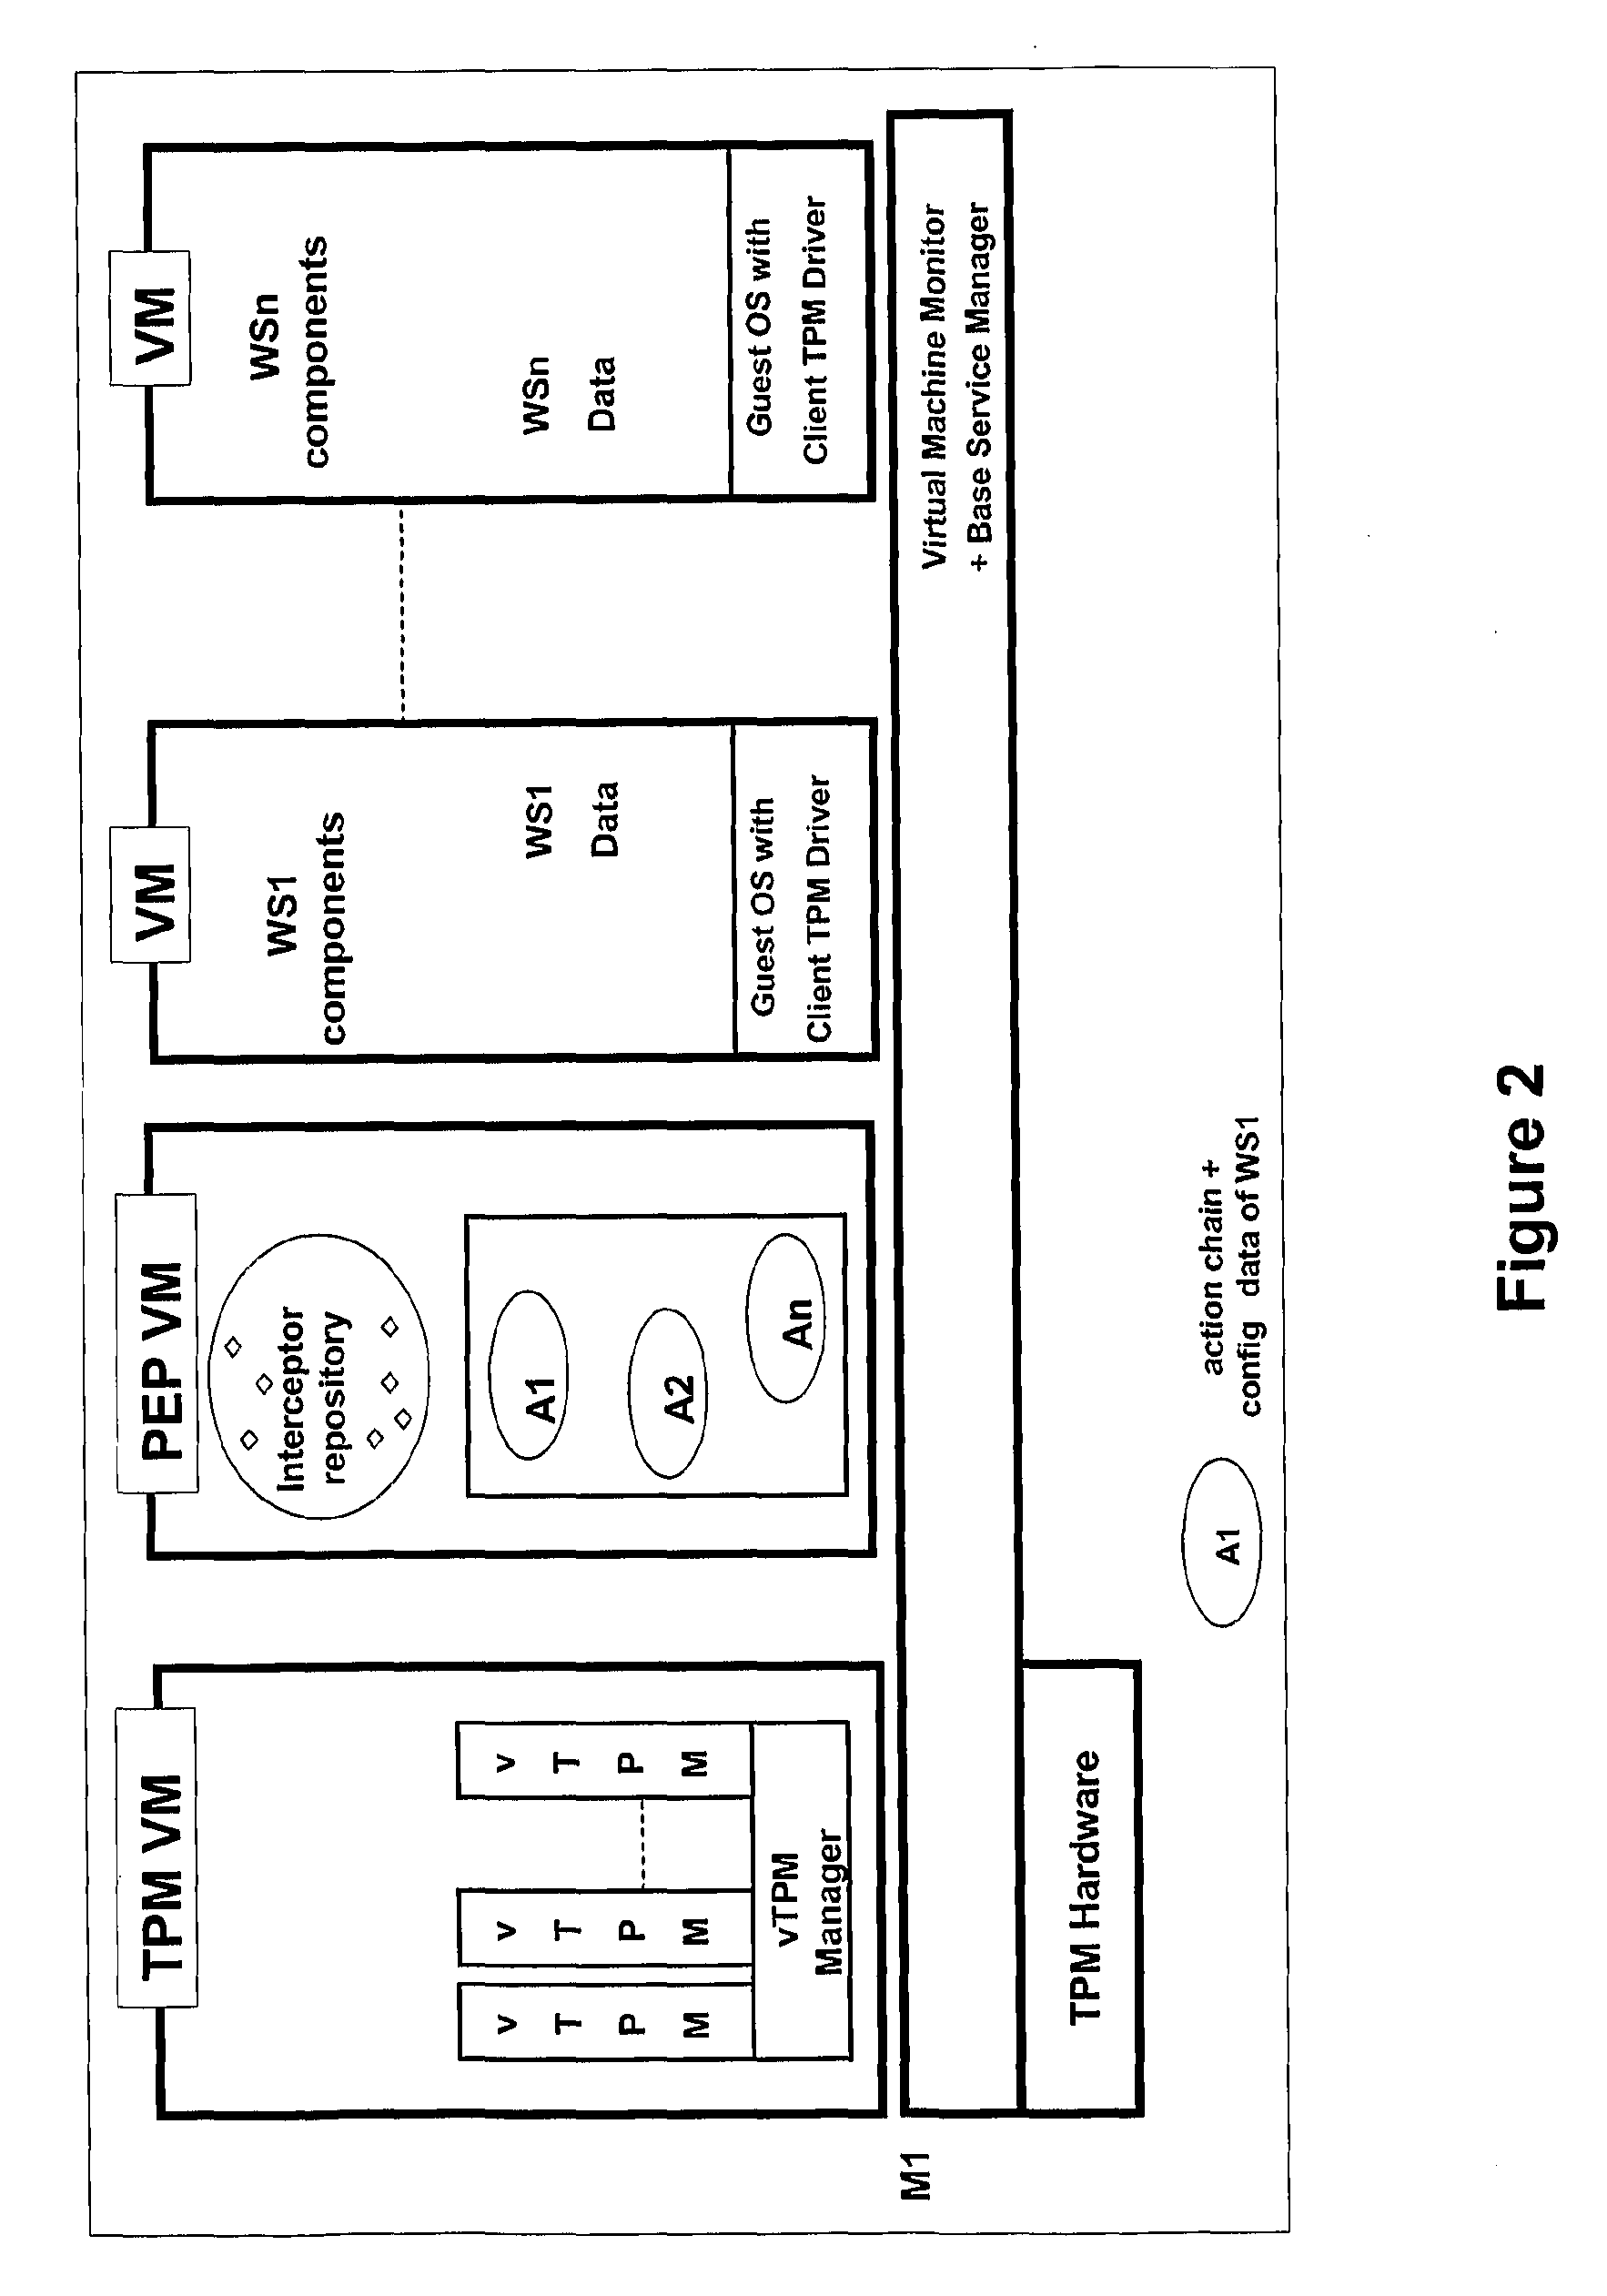 Distributed computing network using multiple local virtual machines